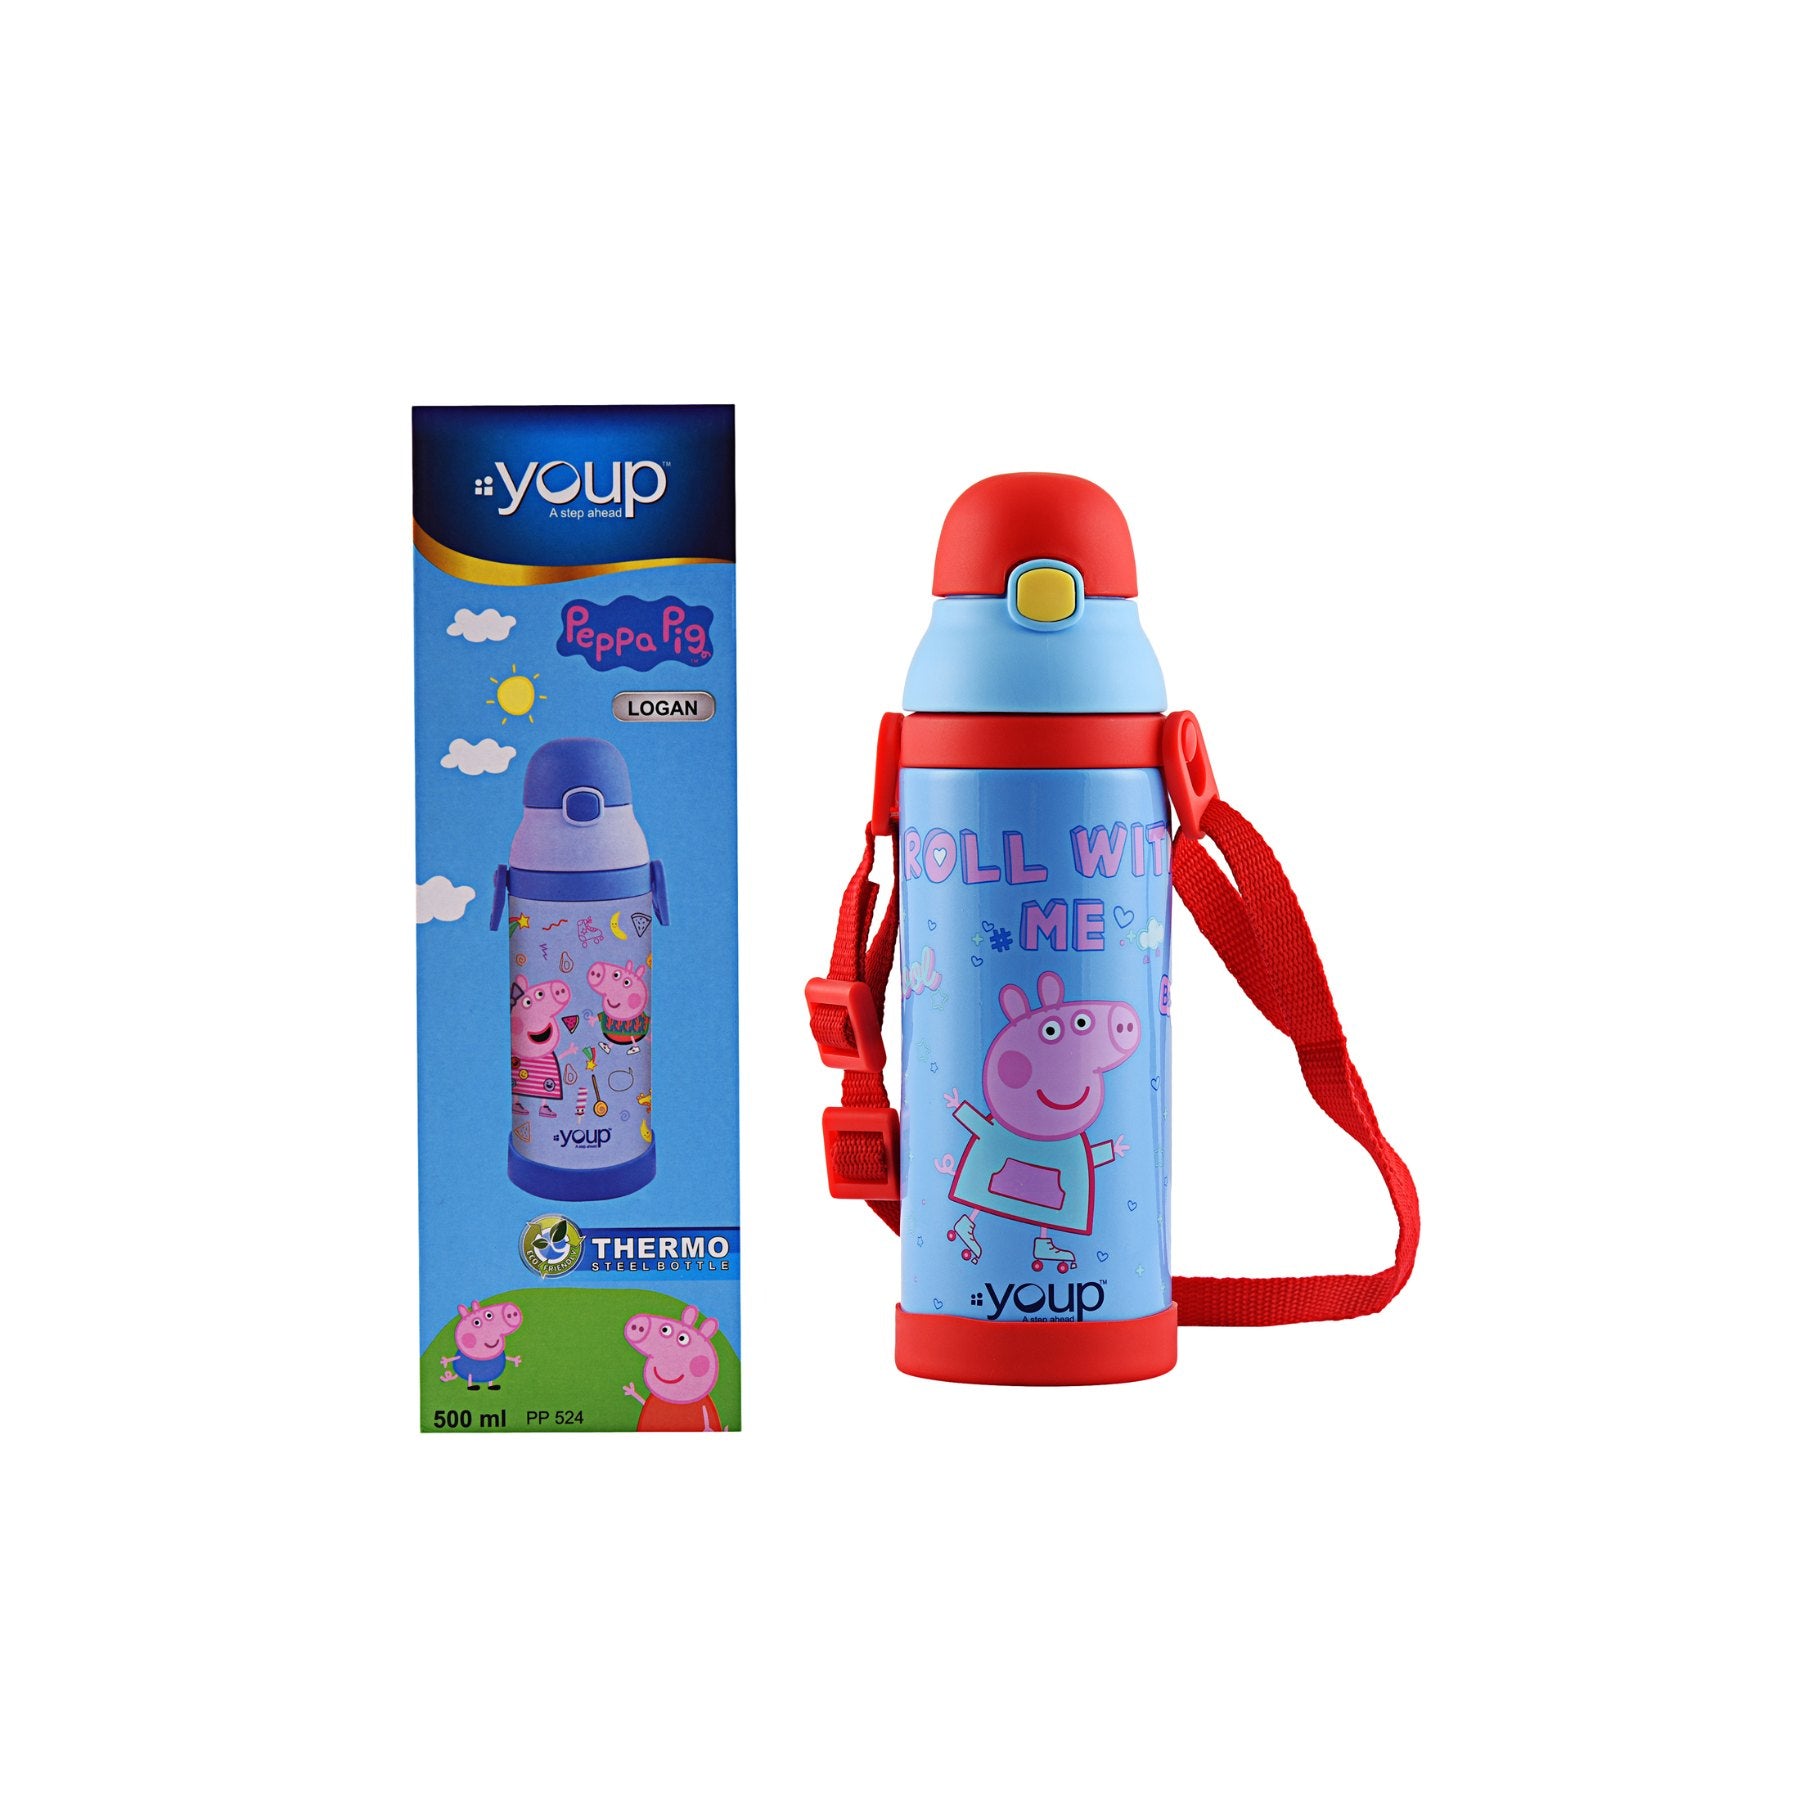 Youp Stainless Steel Insulated Orange Color Peppa Pig Kids Sipper Bottle Logan - 500 Ml